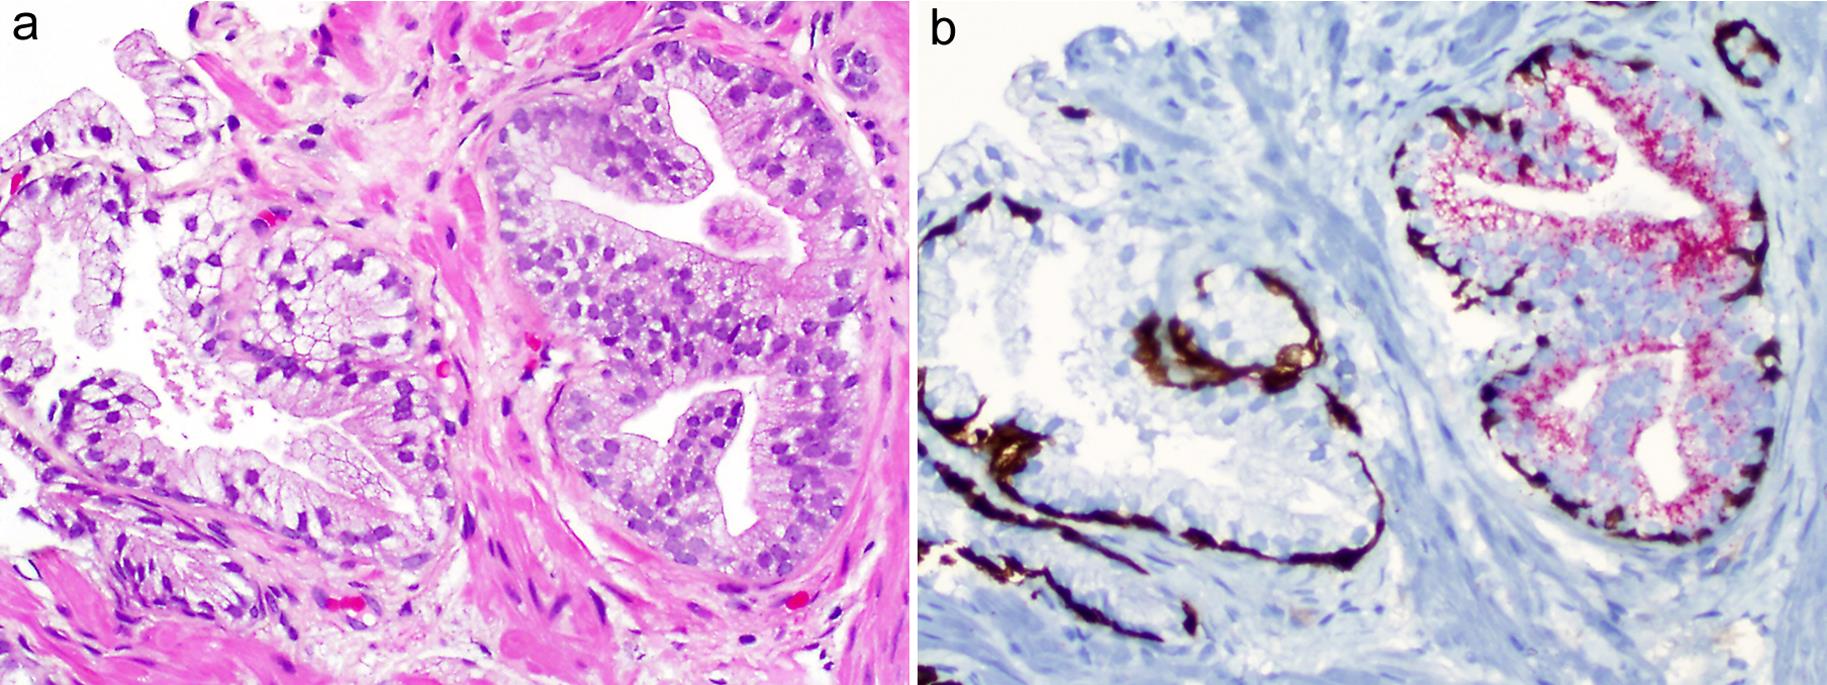 High-grade prostatic intraepithelial neoplasia (HGPIN) shows flat and papillary growth patterns, with the overlying epithelial cells having enlarged nuclei with prominent nucleoli.